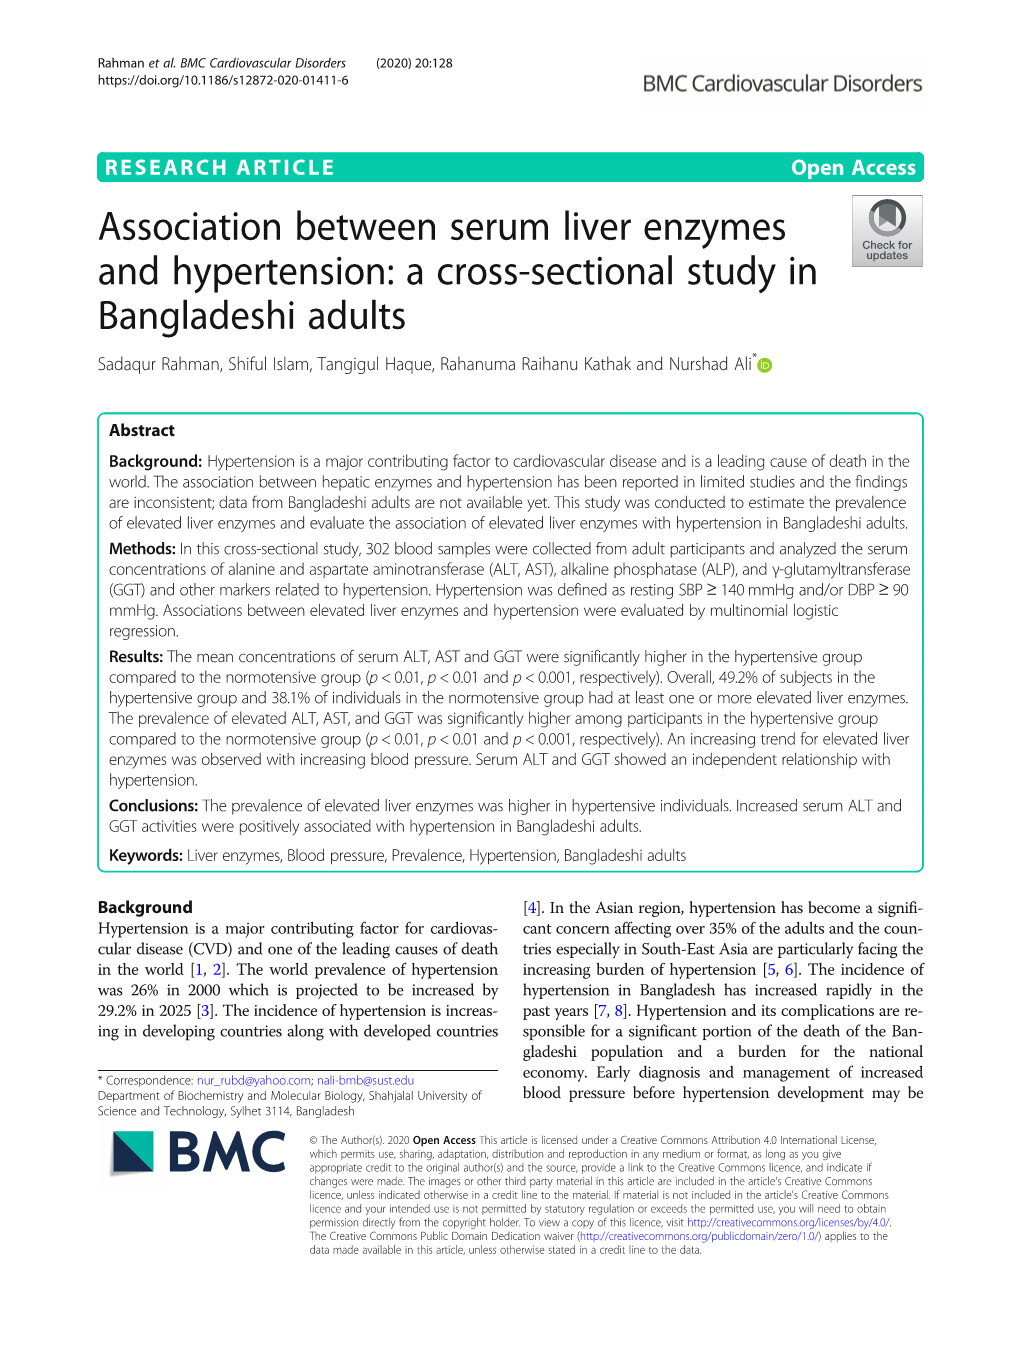 Association Between Serum Liver Enzymes and Hypertension